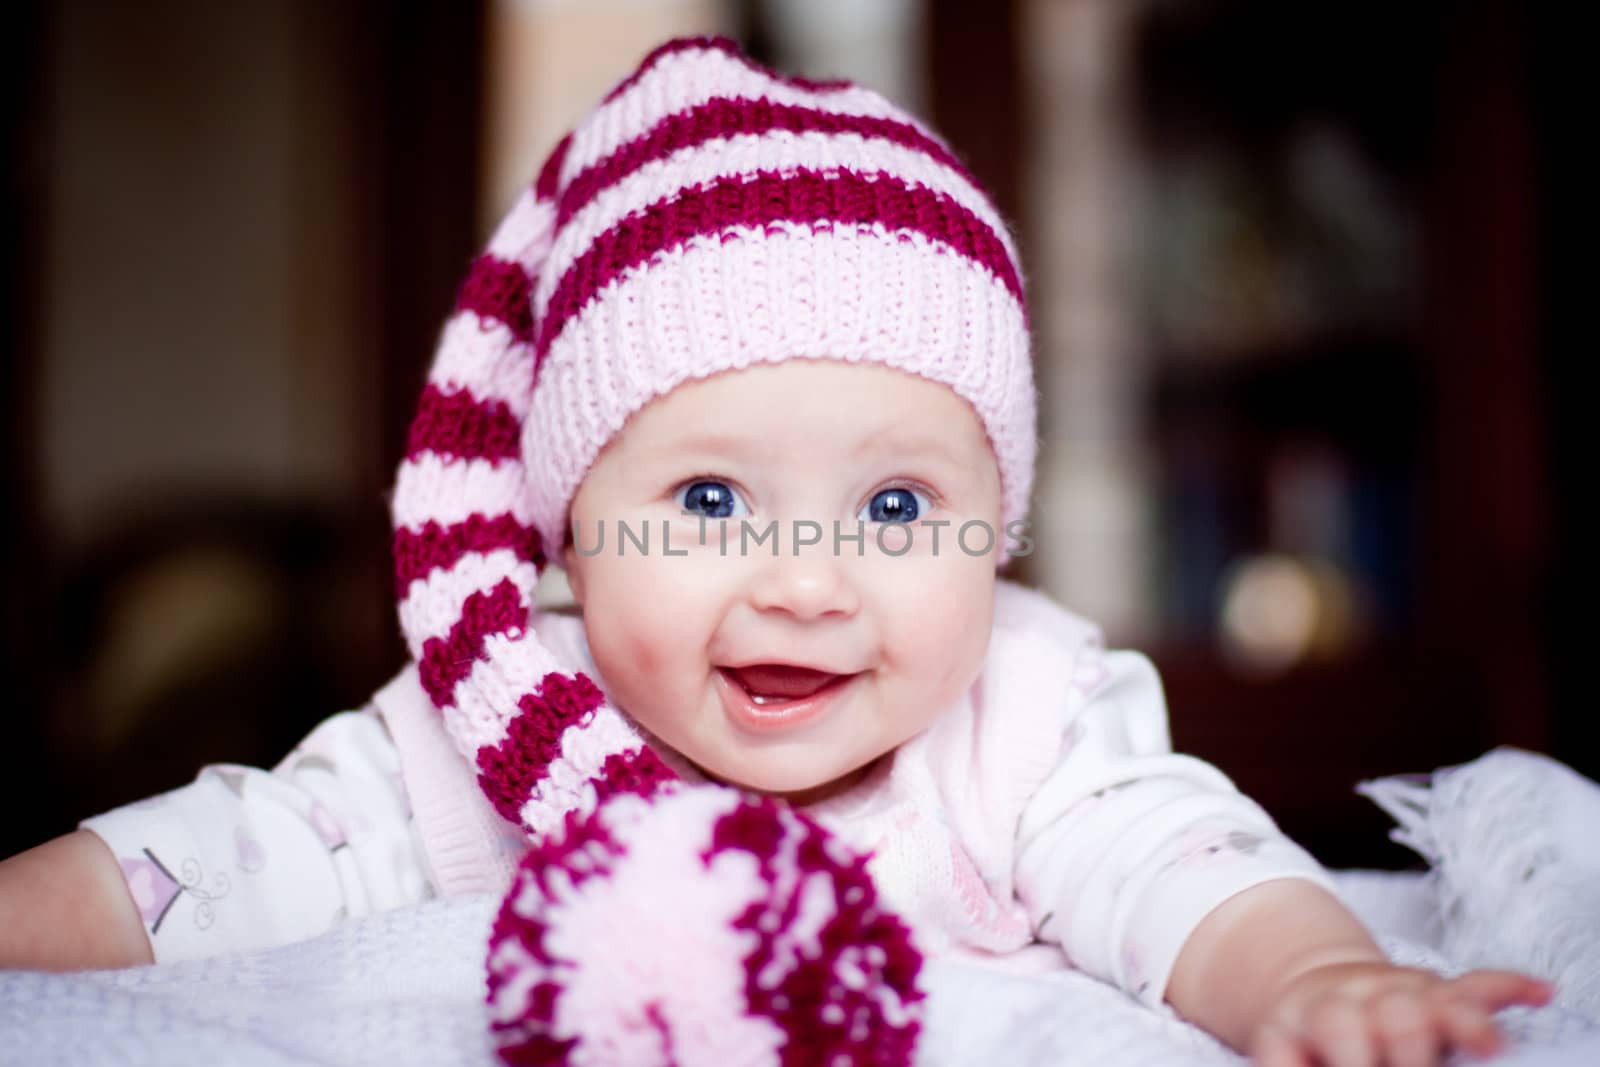 cute baby in a striped purple hat with pompom